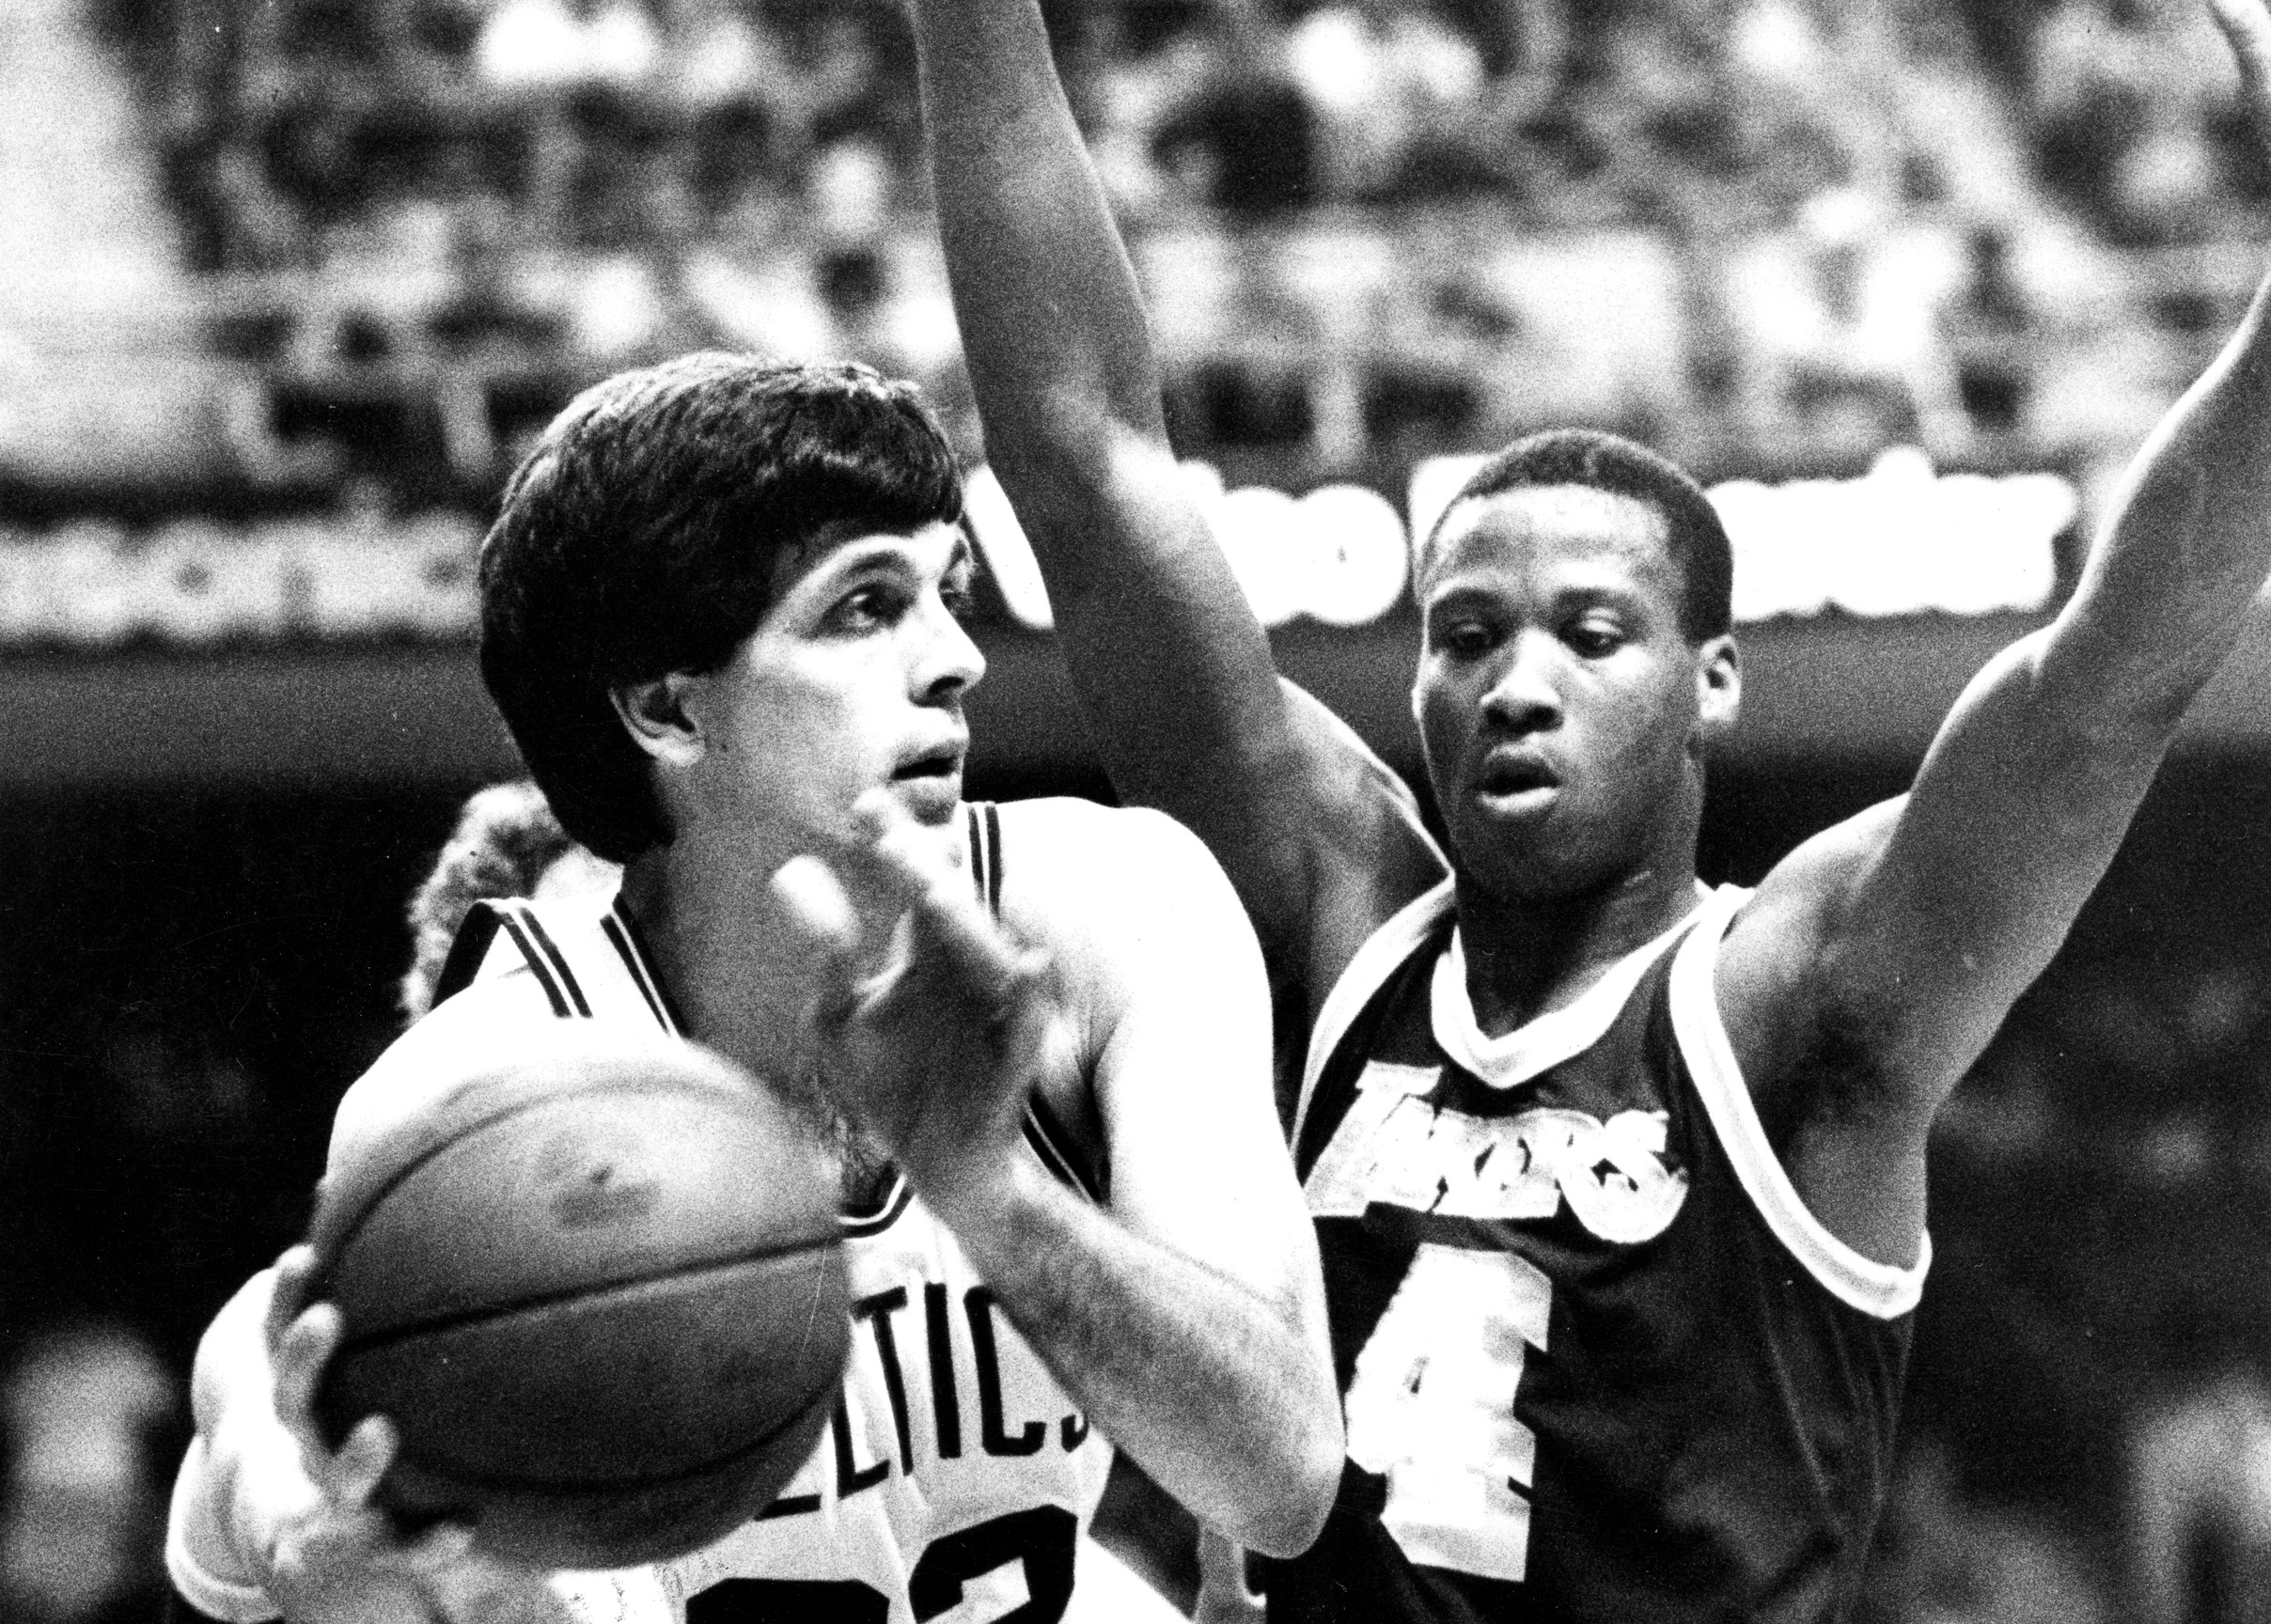 The Retired Number Project: Number 32 – Kevin McHale